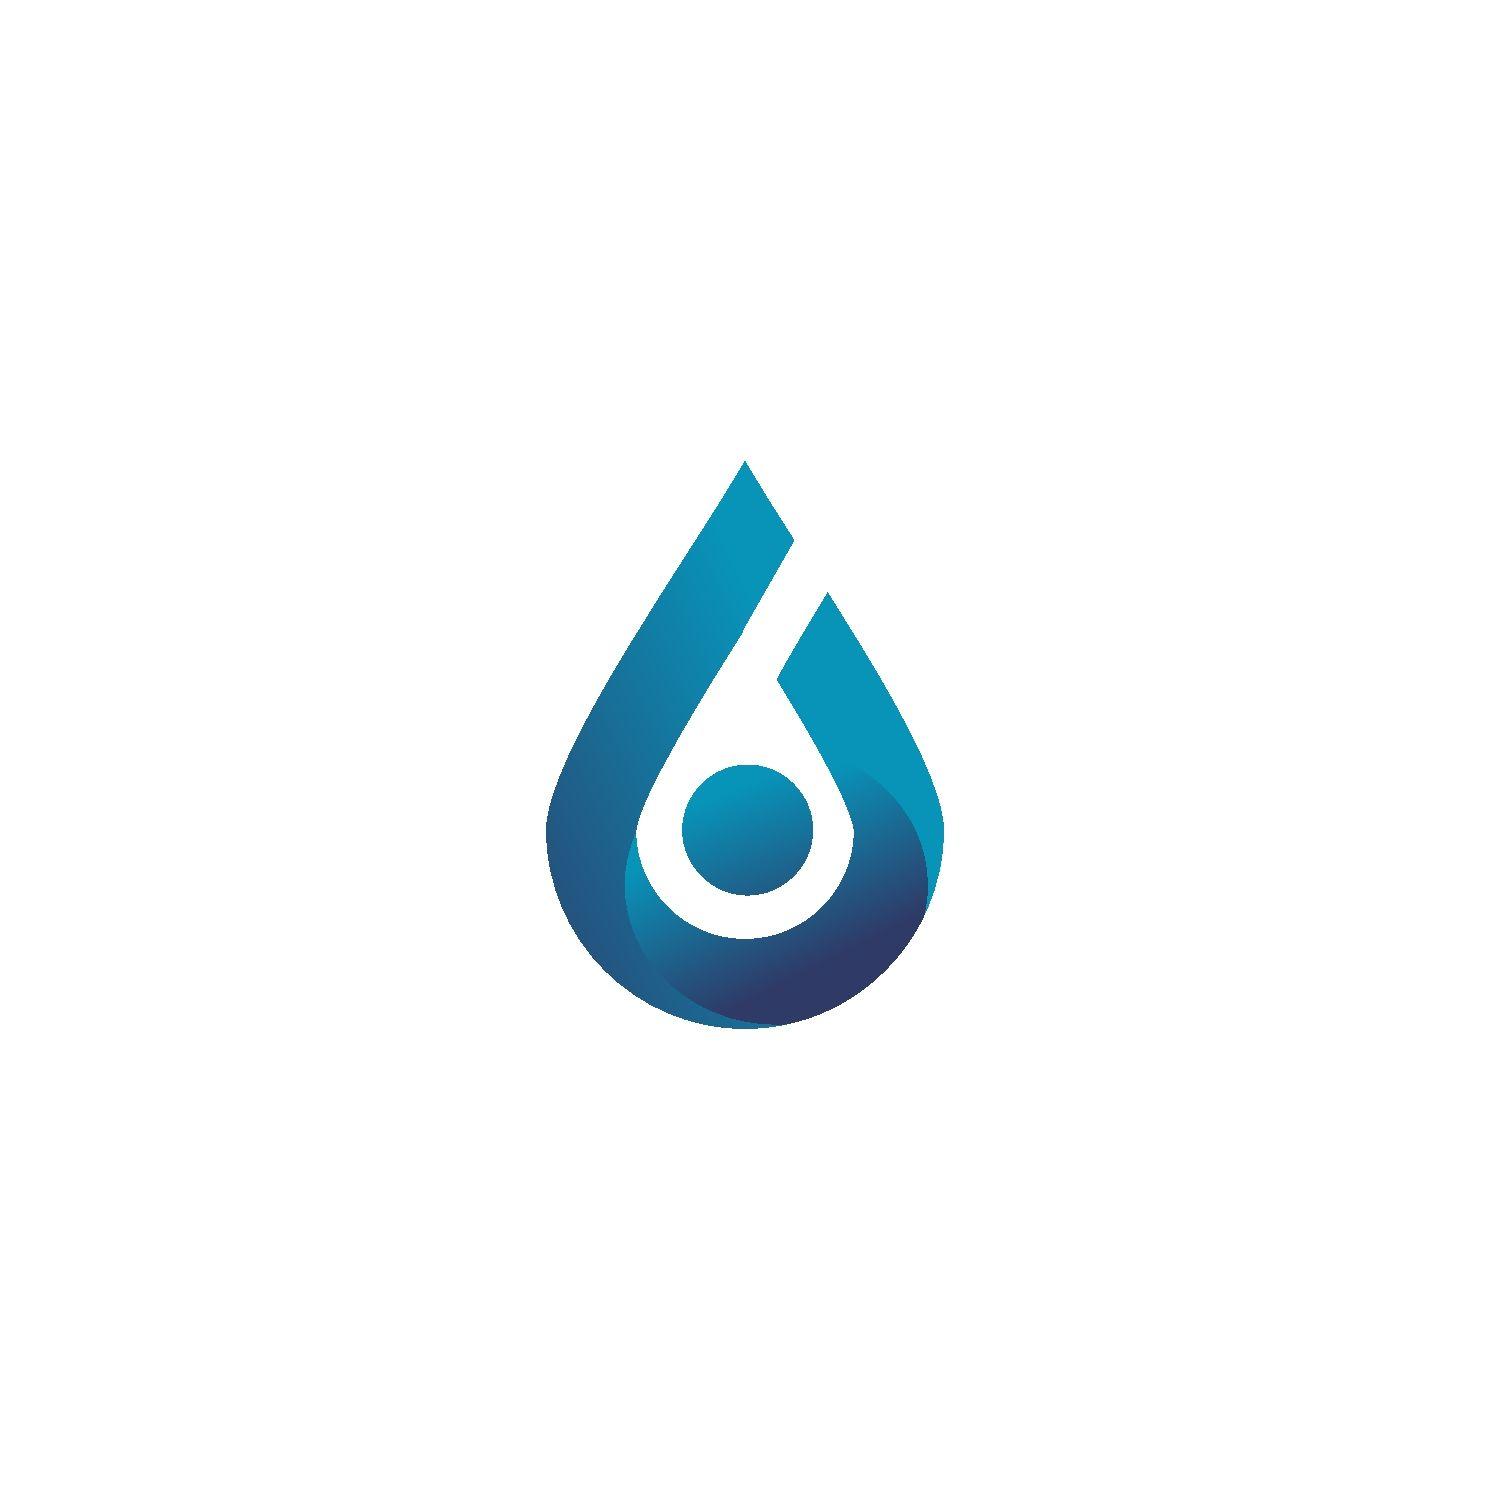 Chemical Company Logo - Traditional, Feminine, Chemical Product Logo Design for no text